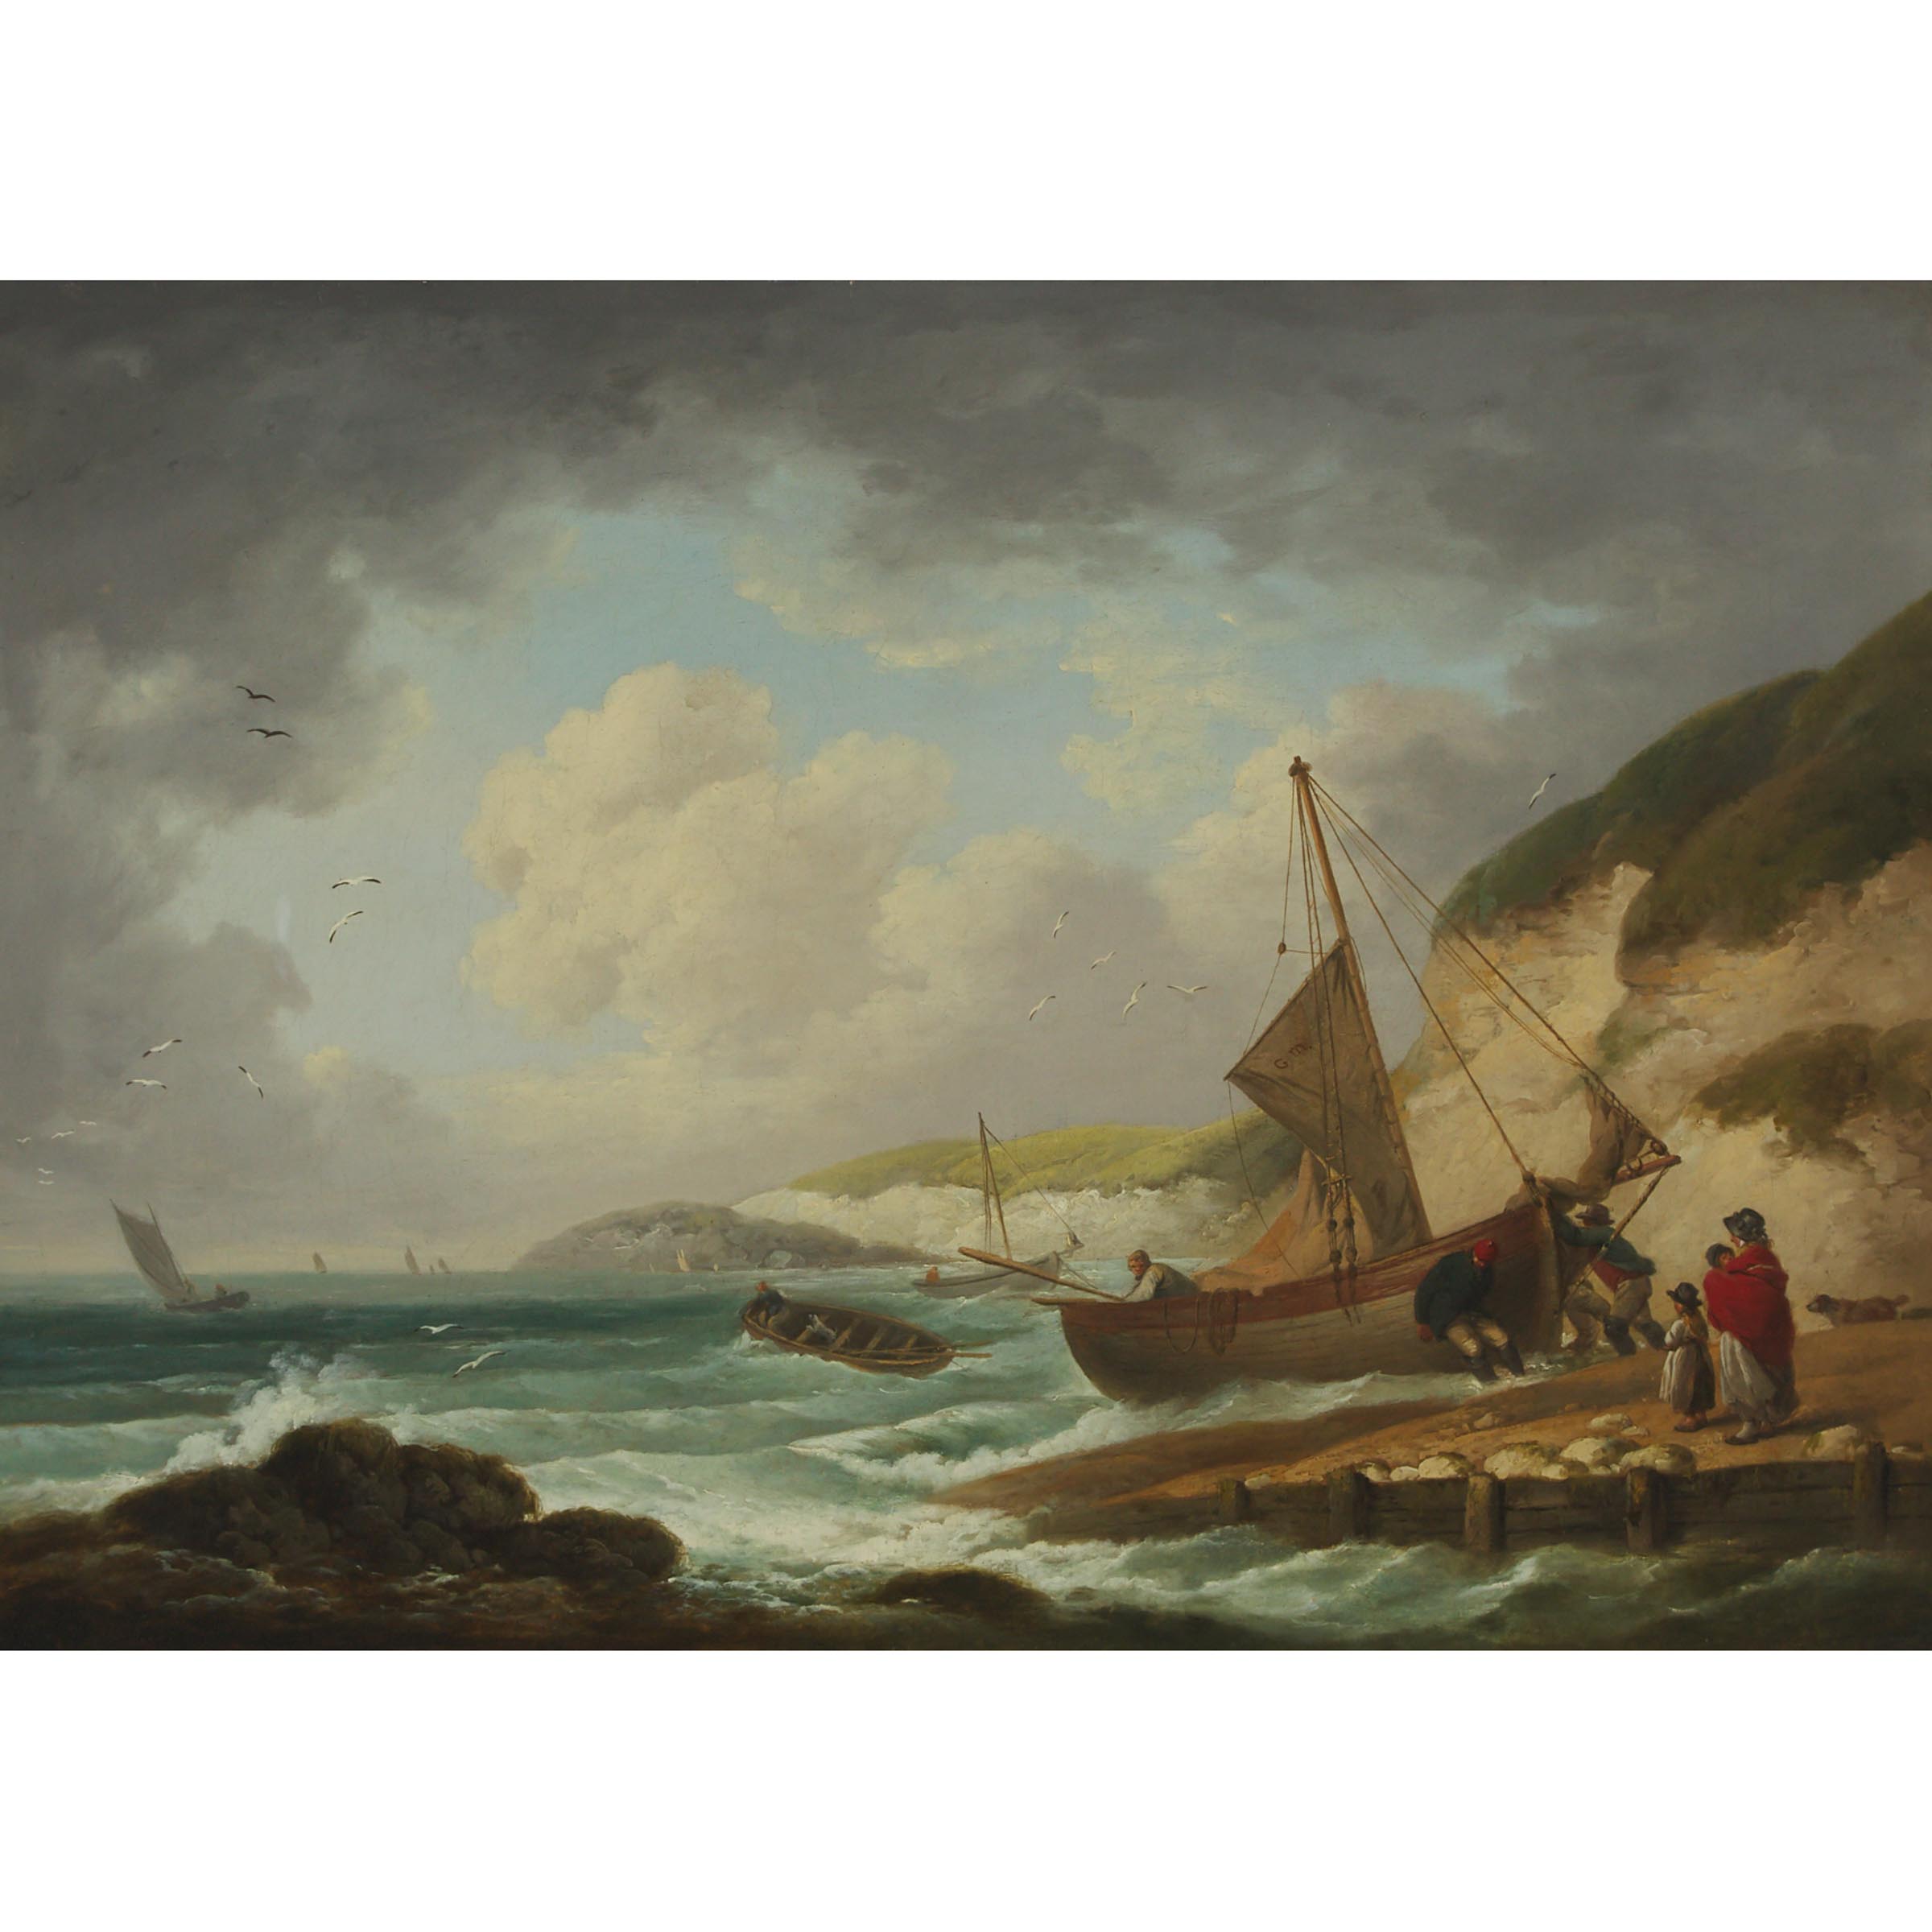 Attributed to George Morland (1763-1804)